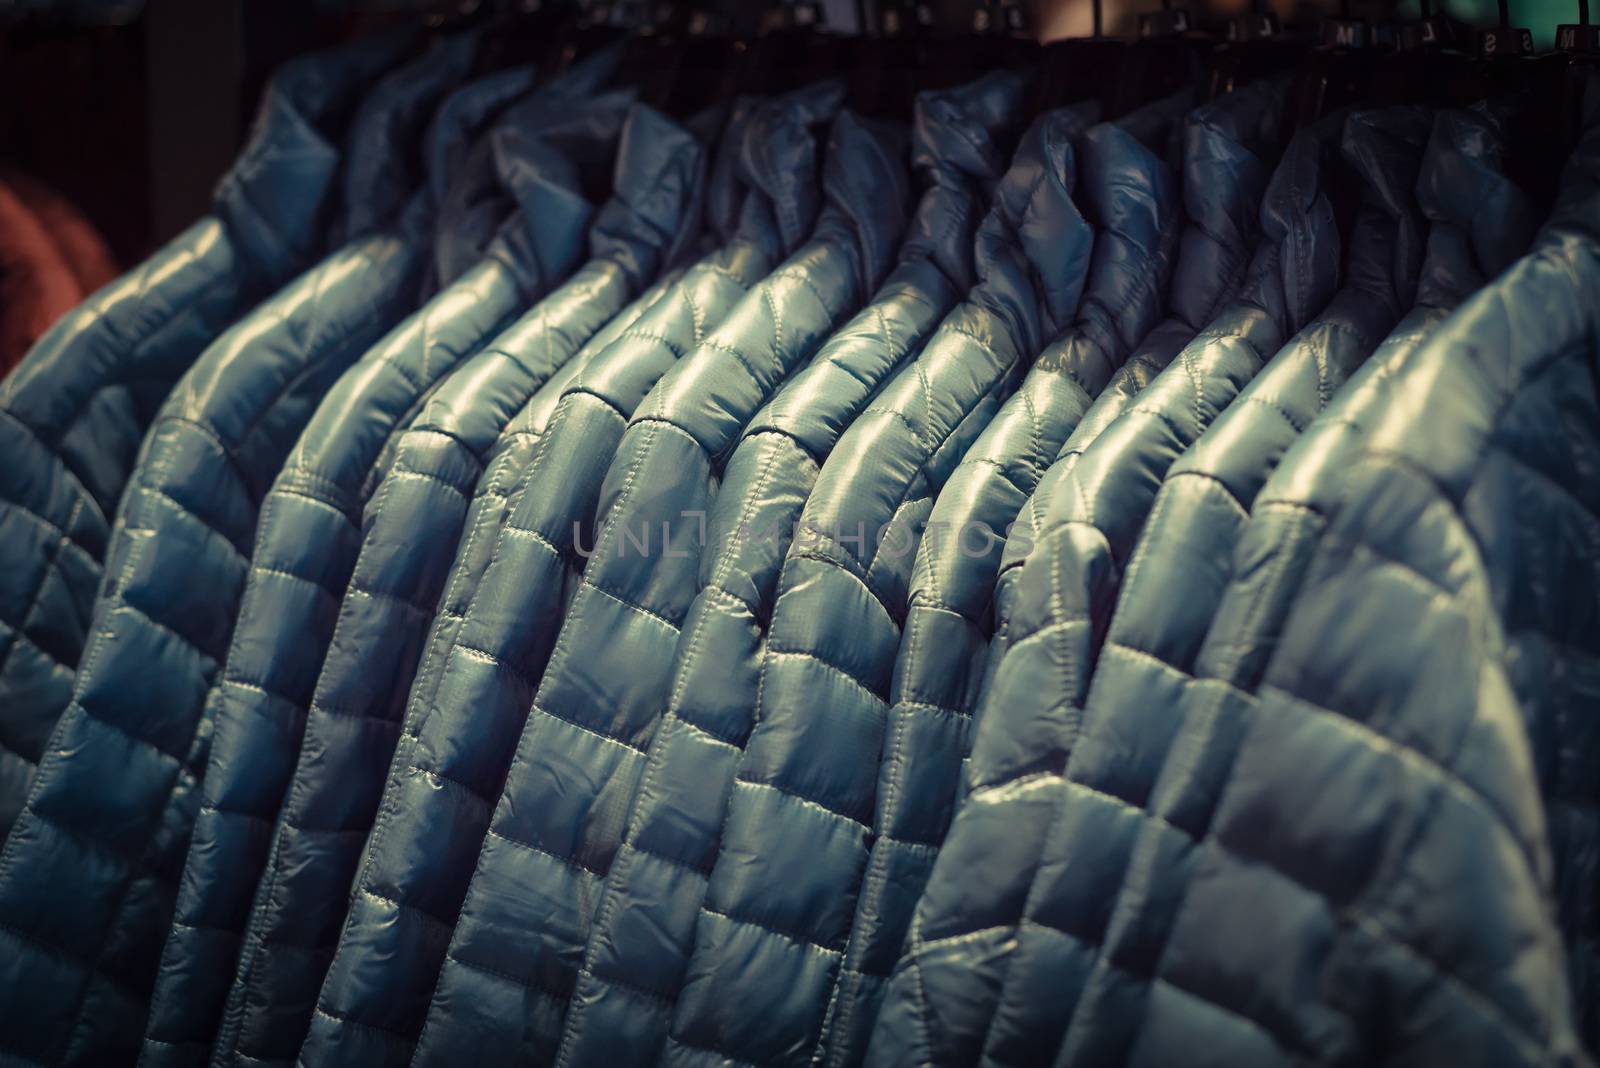 Filtered tone row of women down jackets at American outdoor clot by trongnguyen